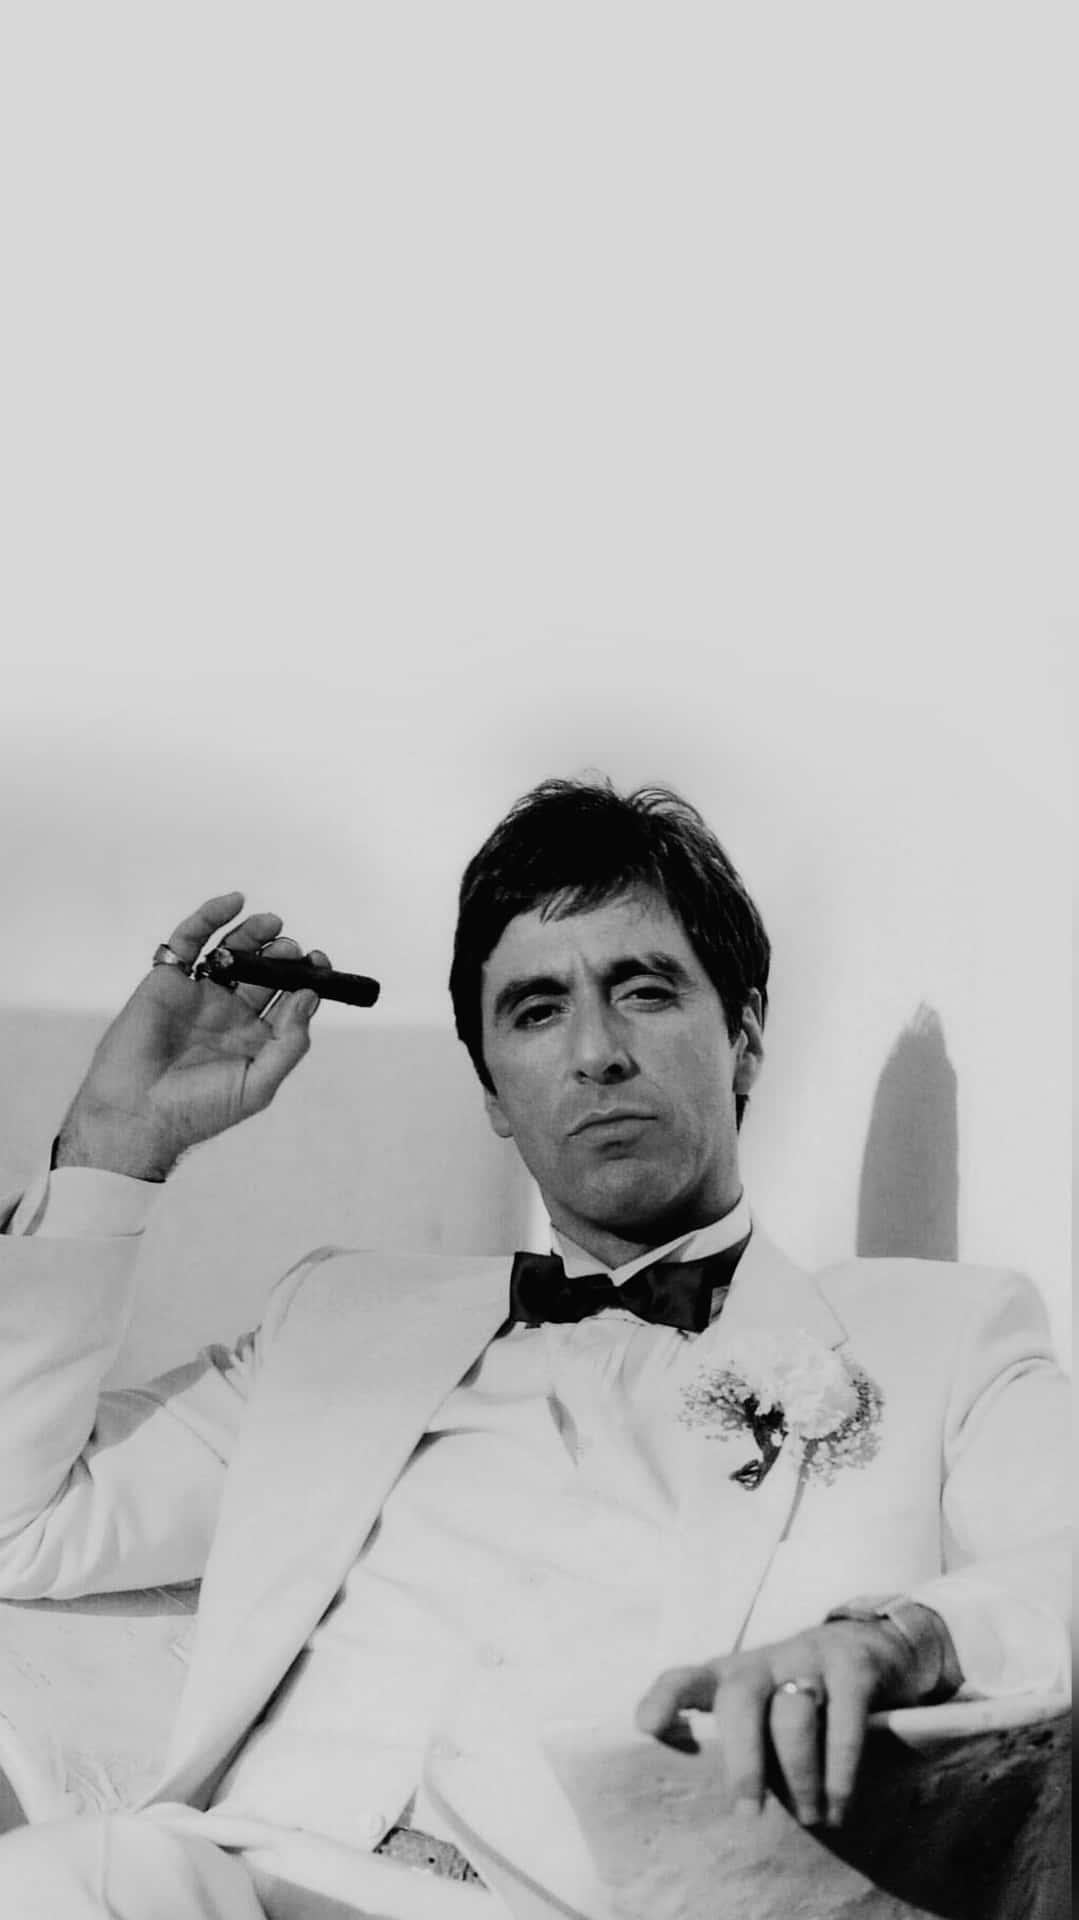 Tony Montana Relaxing With Cigar Background